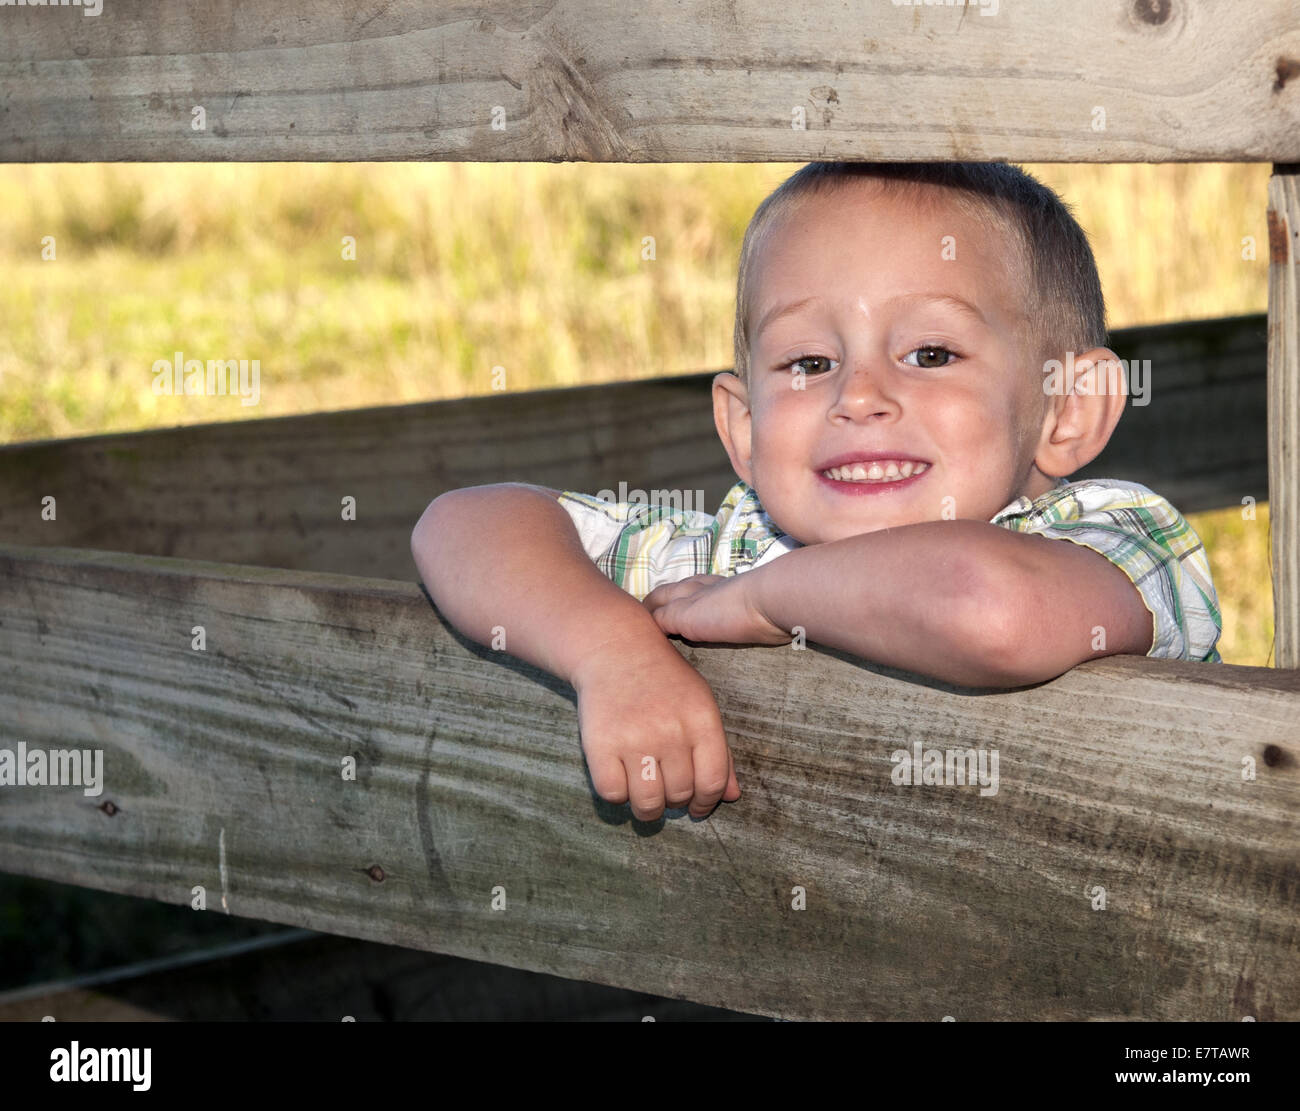 4-5 year old boy in barn stall smiling Stock Photo